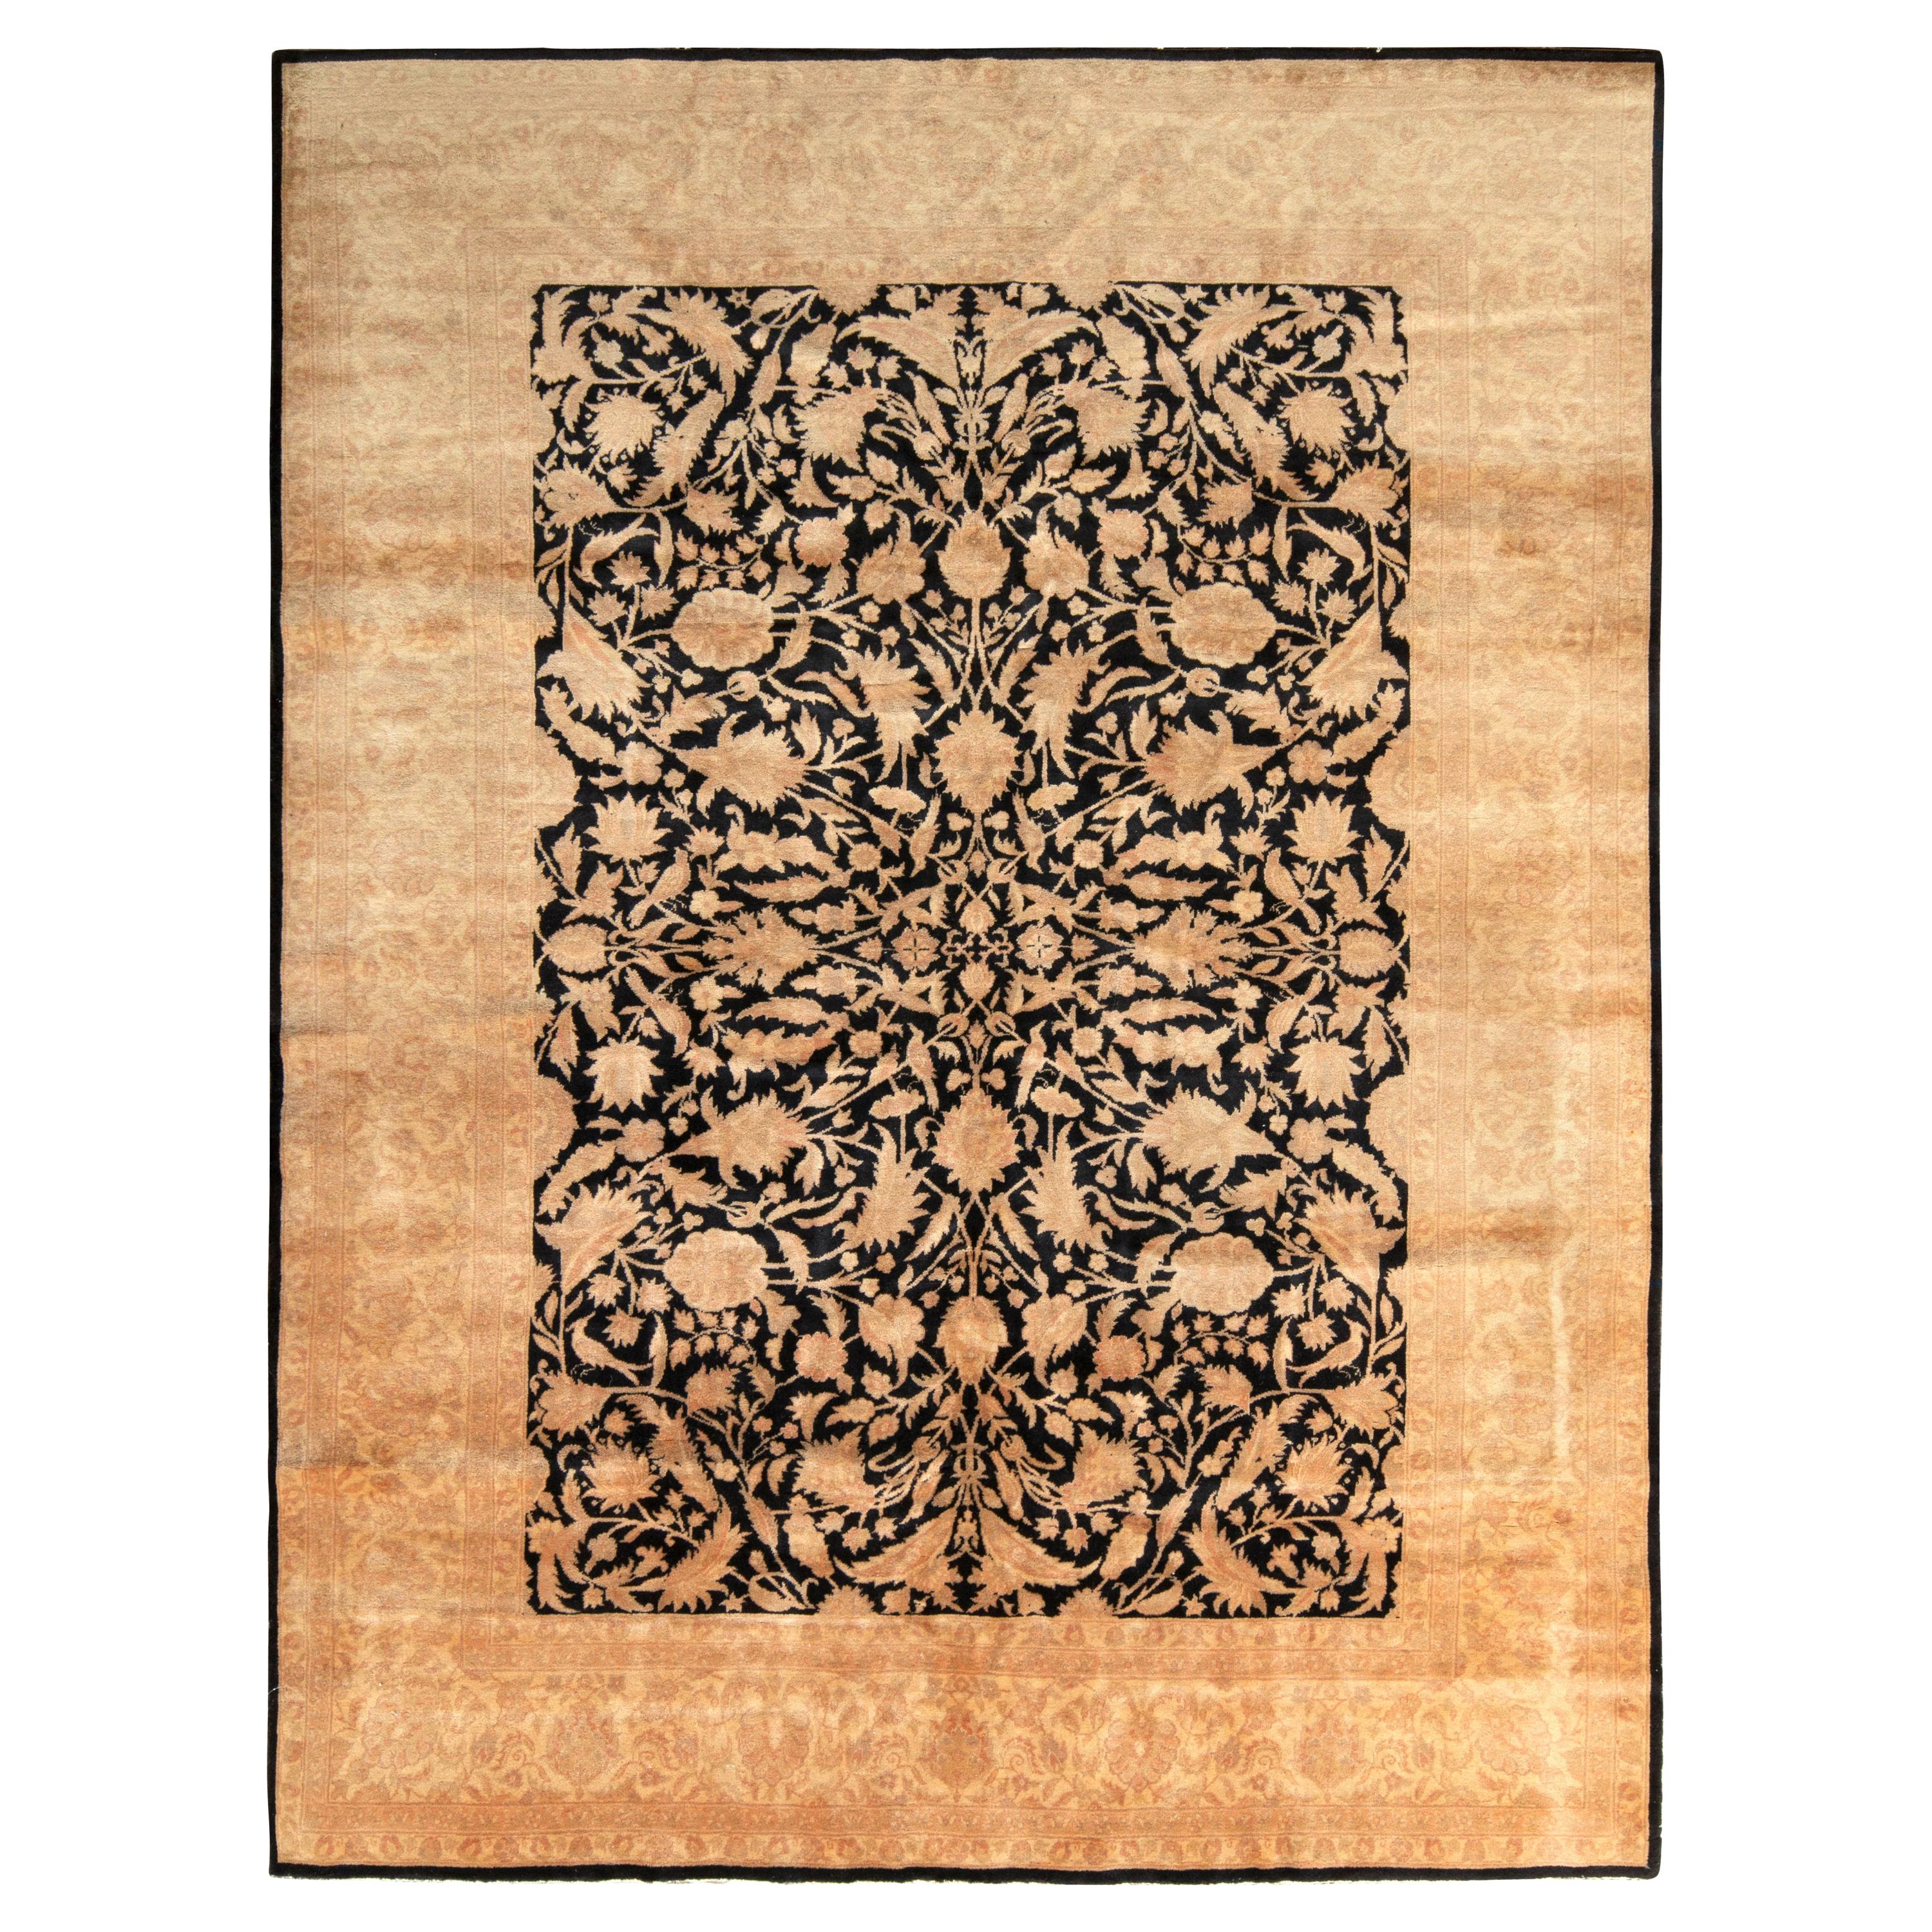 Rug & Kilim’s Contemporary Rug in Beige-Brown and Black Floral Pattern For Sale